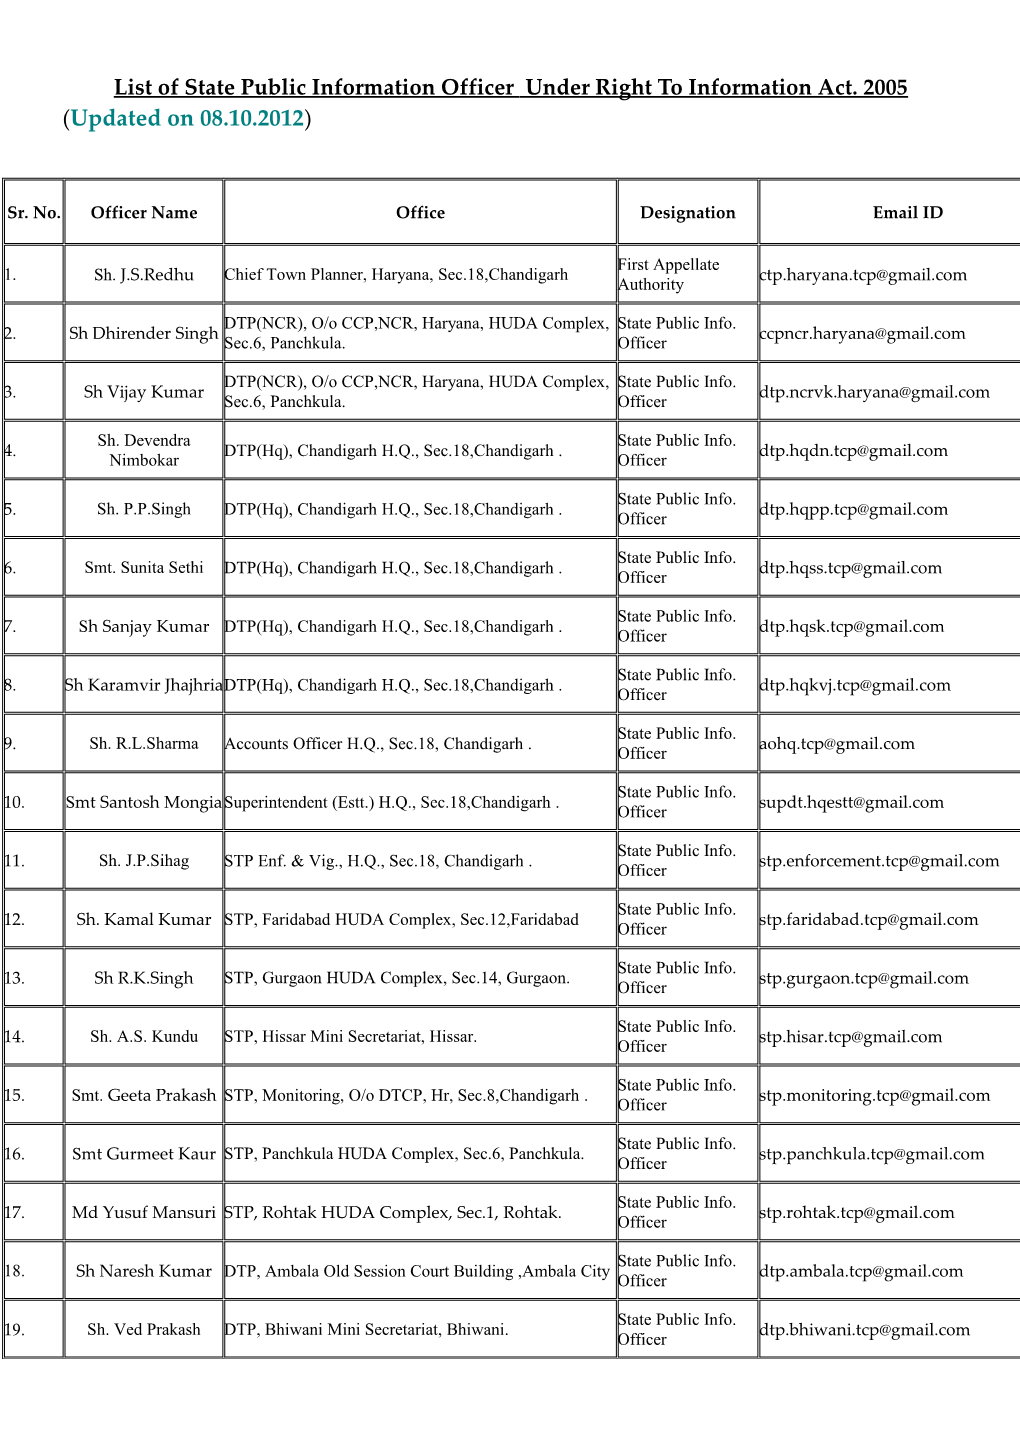 List of State Public Information Officer Under Right to Information Act. 2005